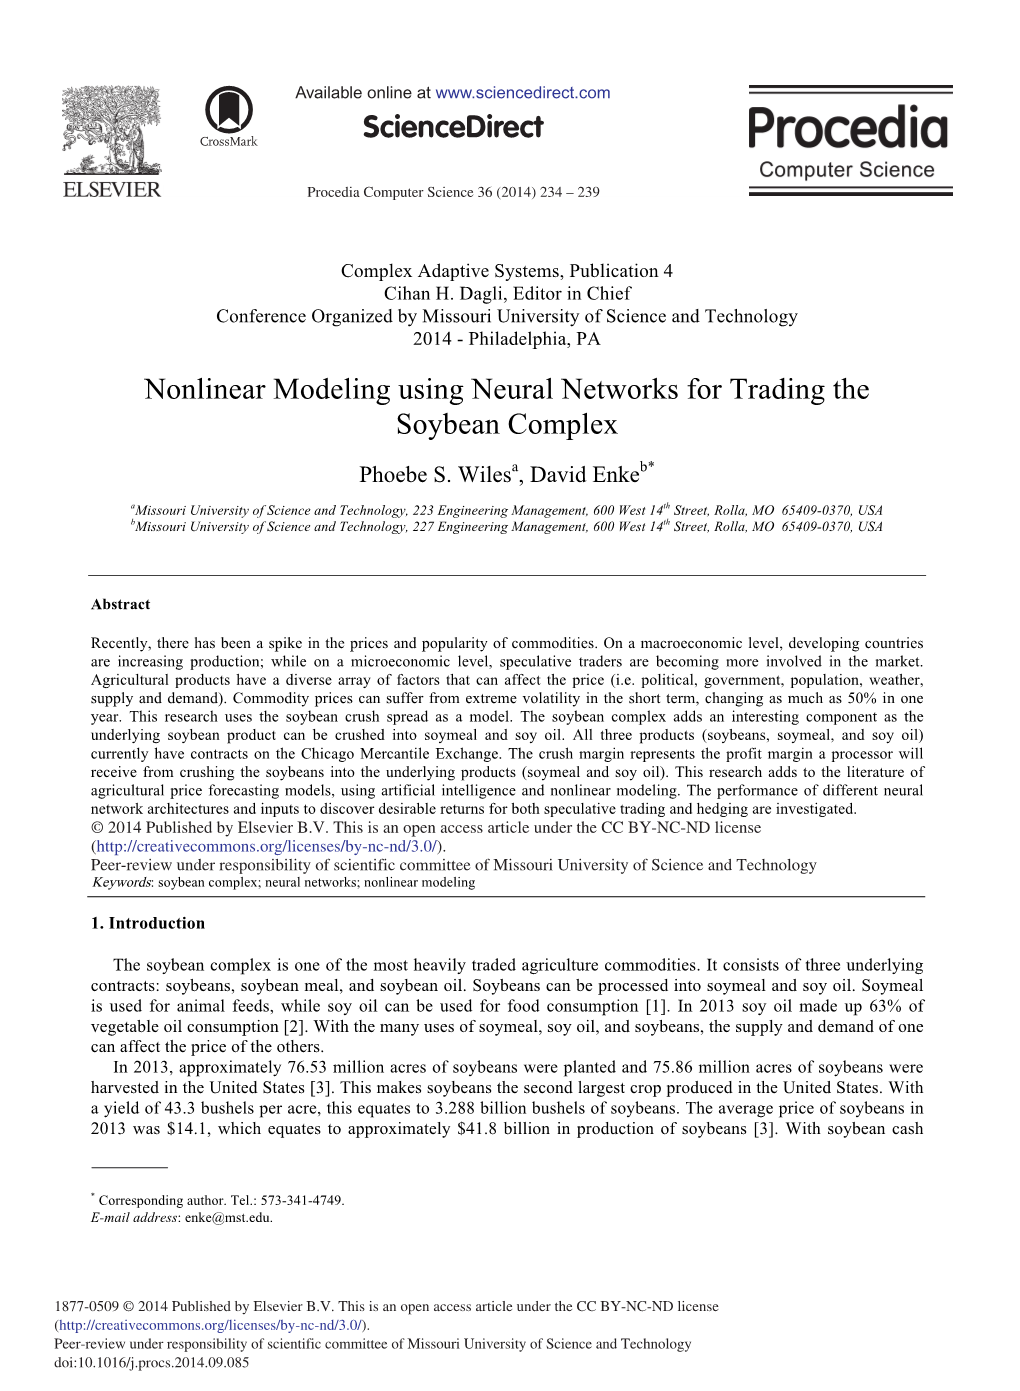 Nonlinear Modeling Using Neural Networks for Trading the Soybean Complex